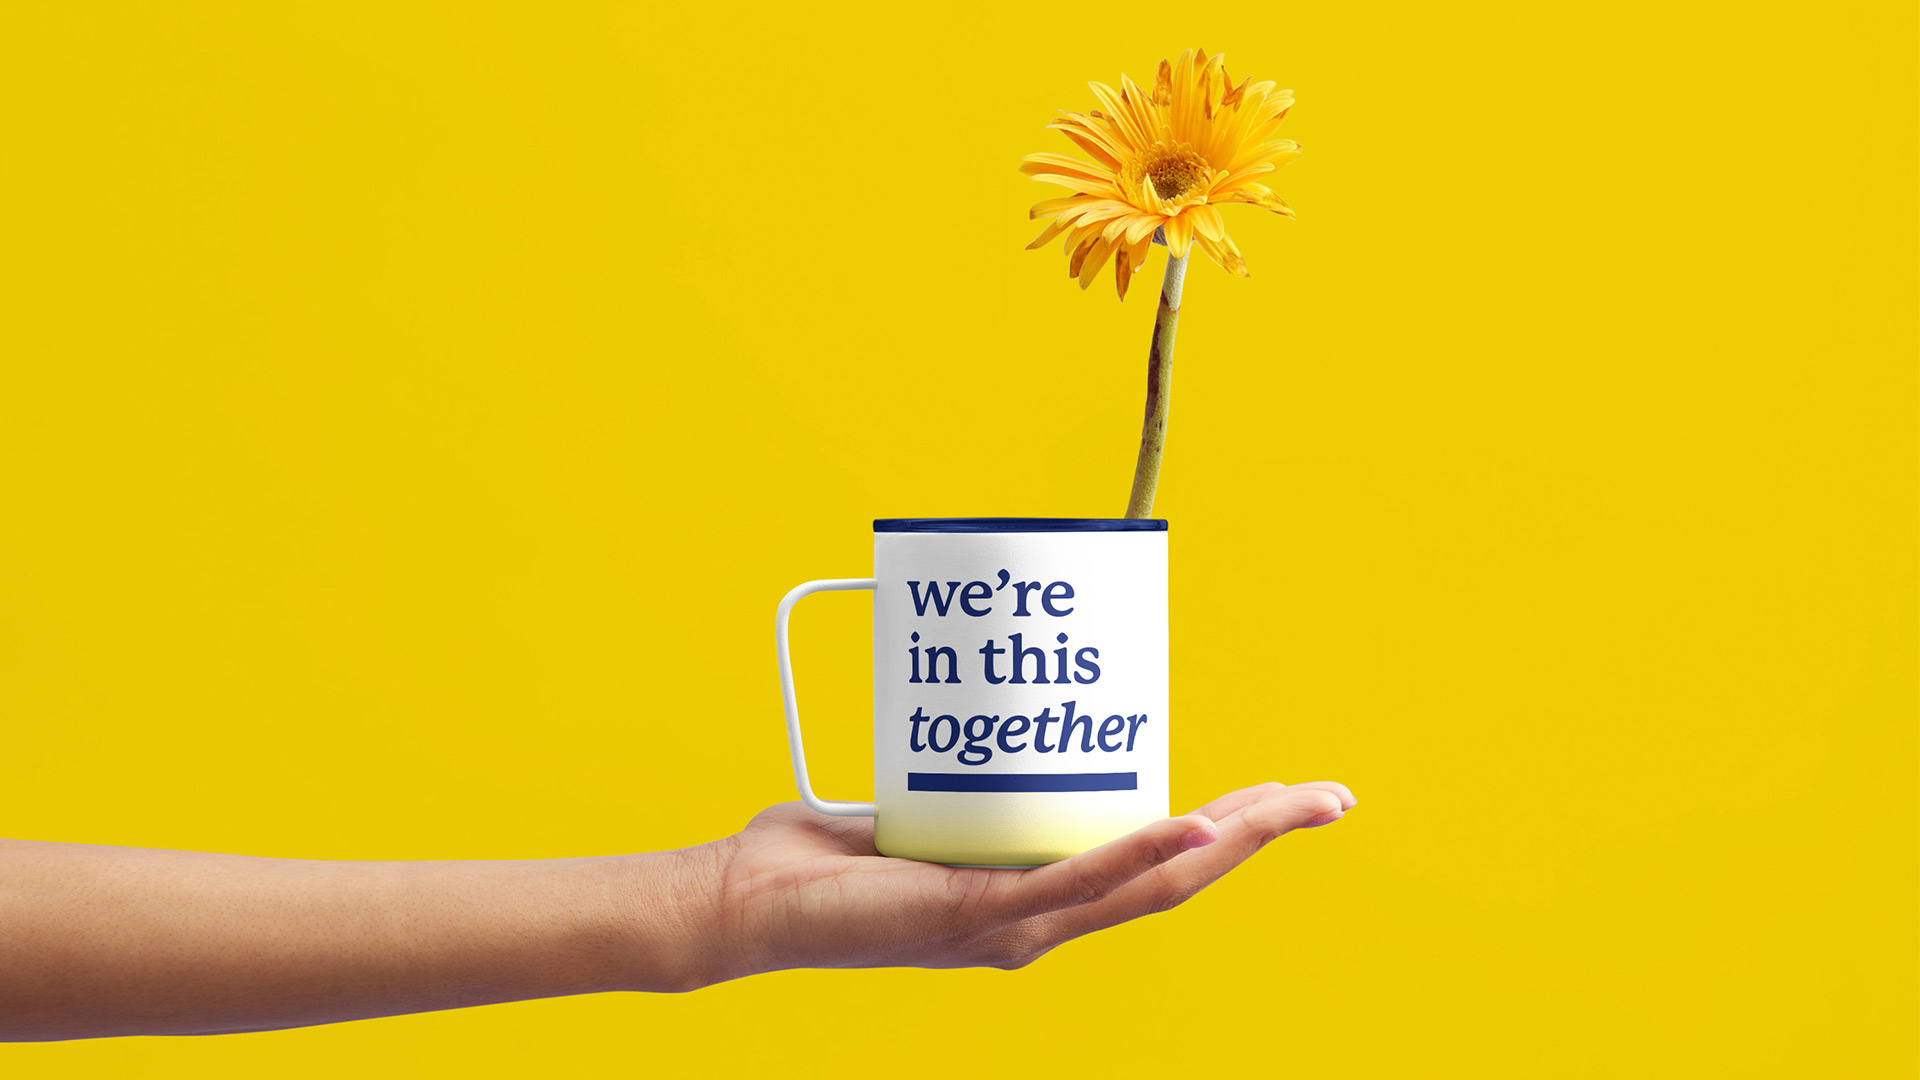 See Saw visual of a flower in a cup on the palm of a hand, with cup design that reads "we're in this together"